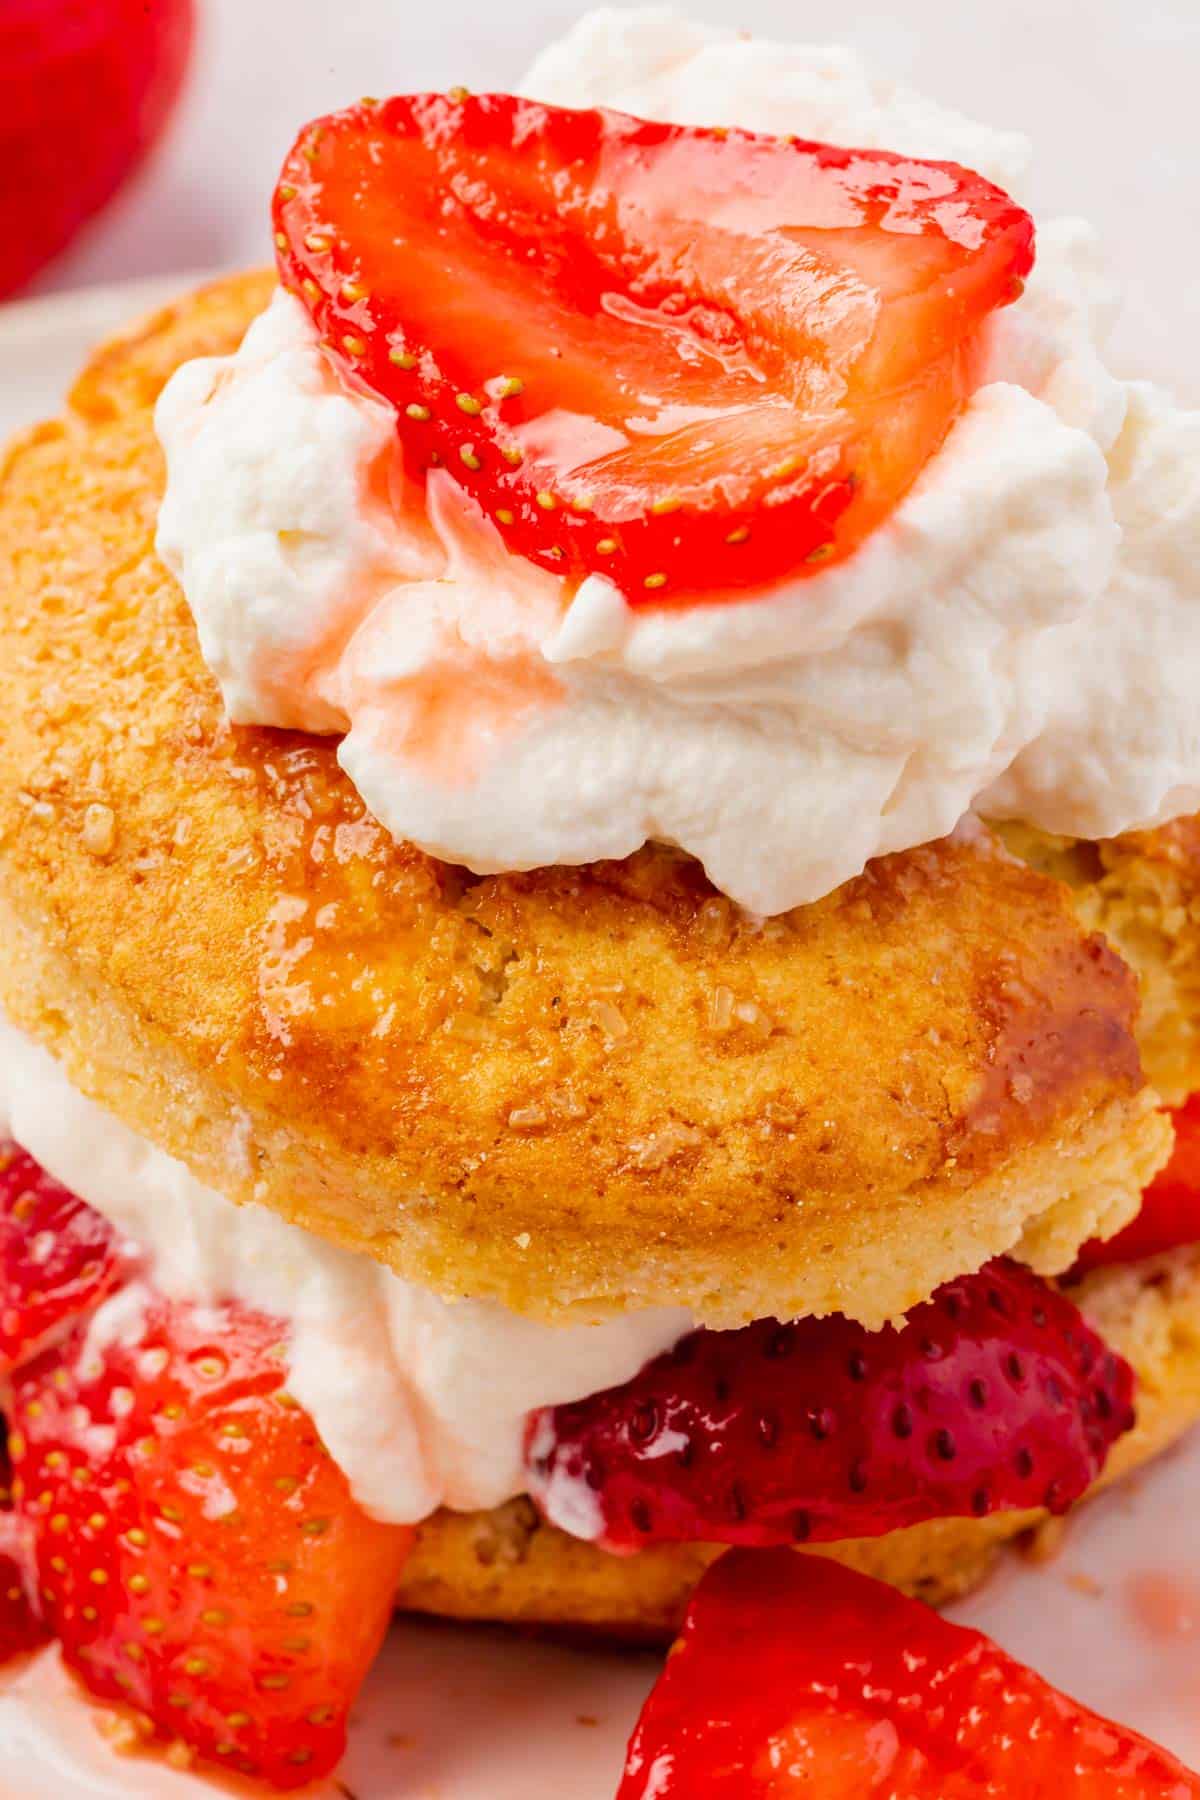 A close up of a gluten-free strawberry shortcake topped with whipped cream and macerated strawberries.